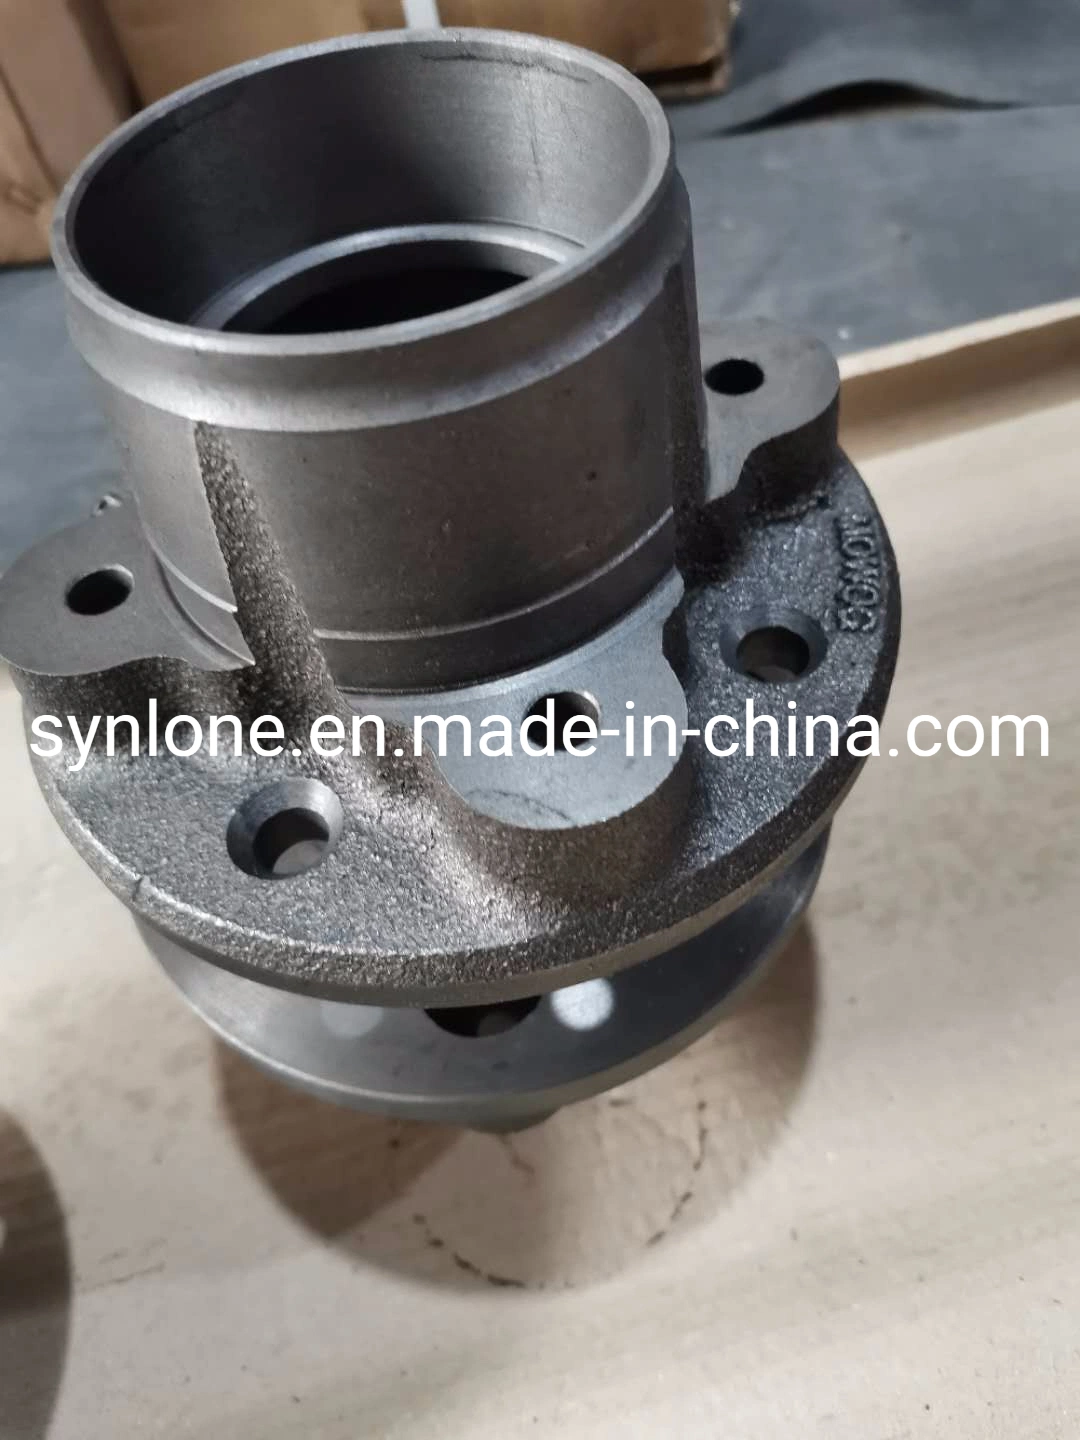 Customzied Casting Iron Flange for Auto